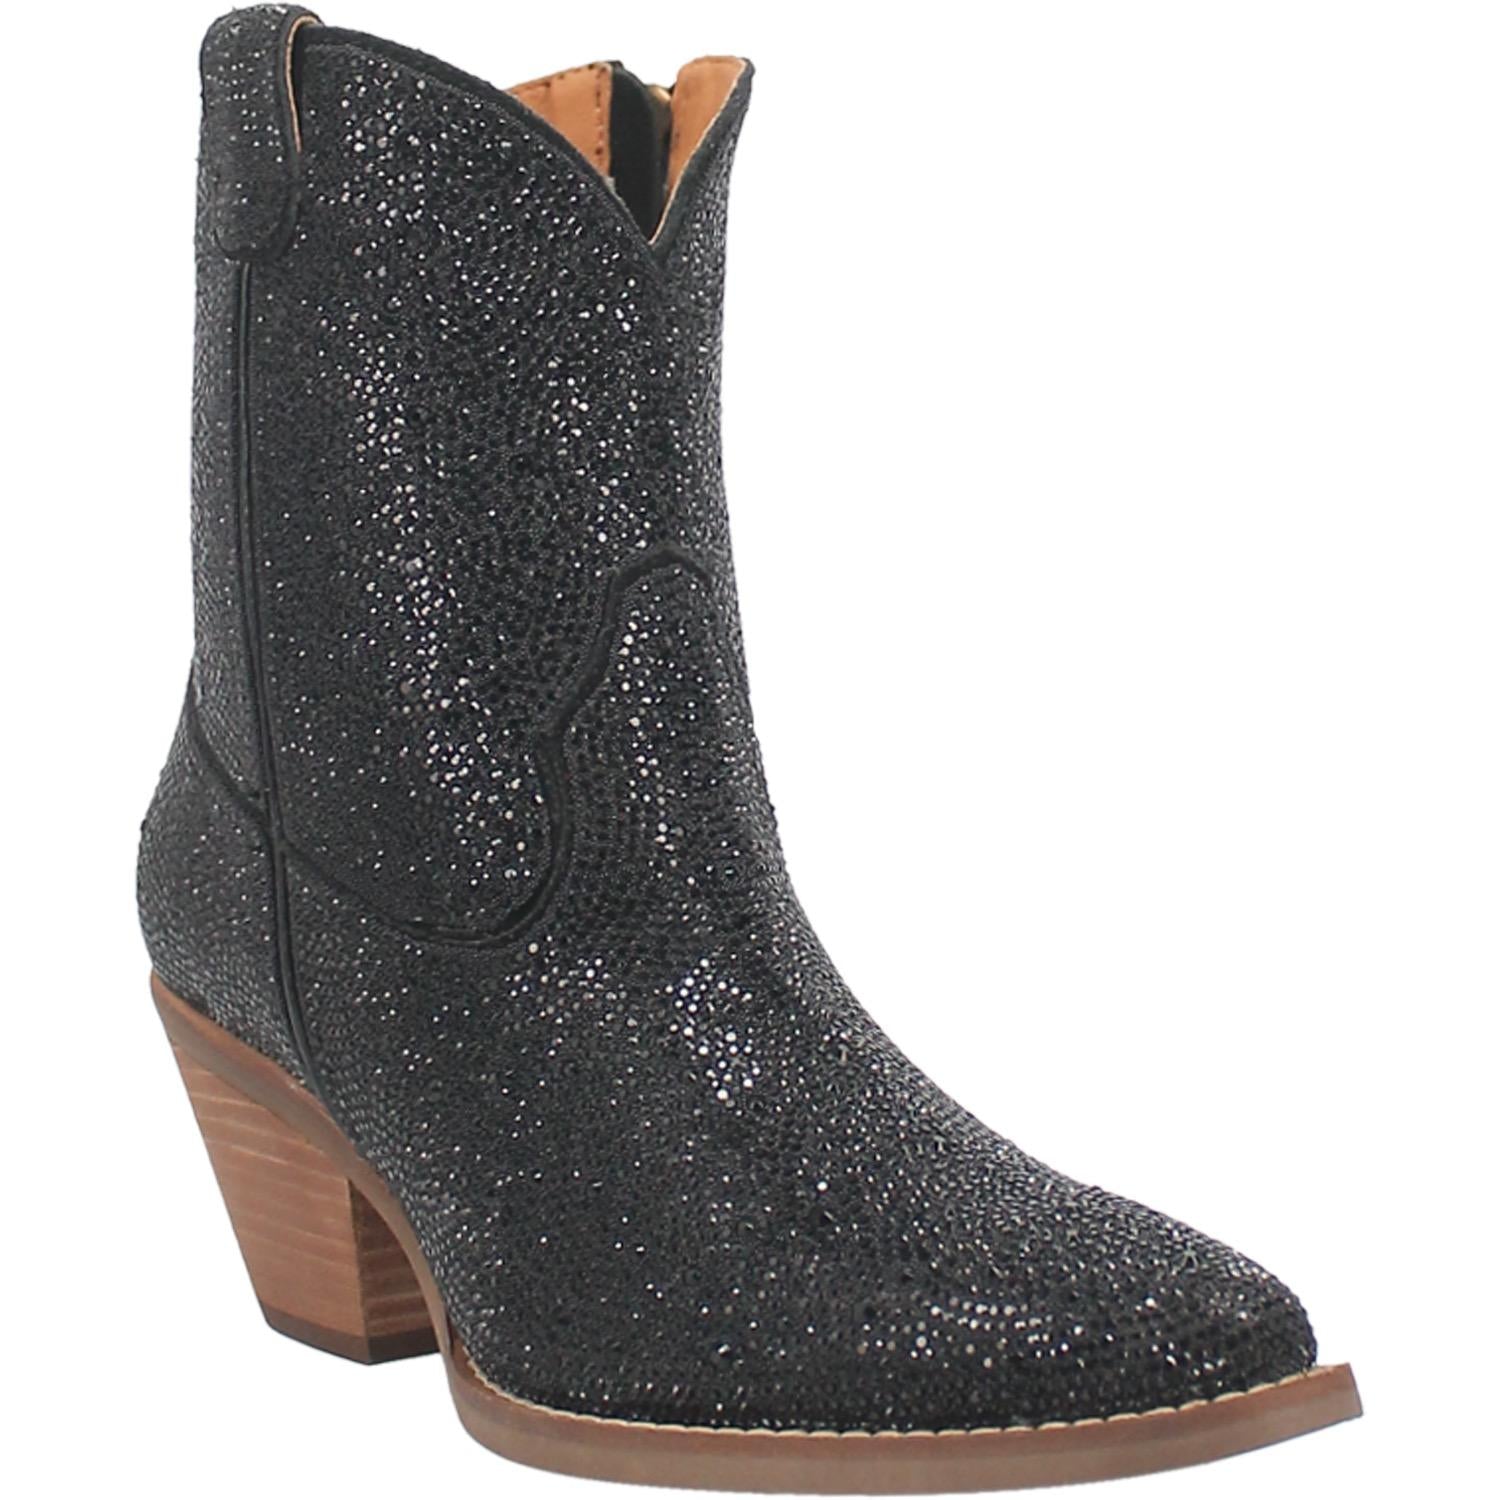 A small bootie with different size black rhinestones from top to bottom, matching straps, short heel, and a V cut at the top.